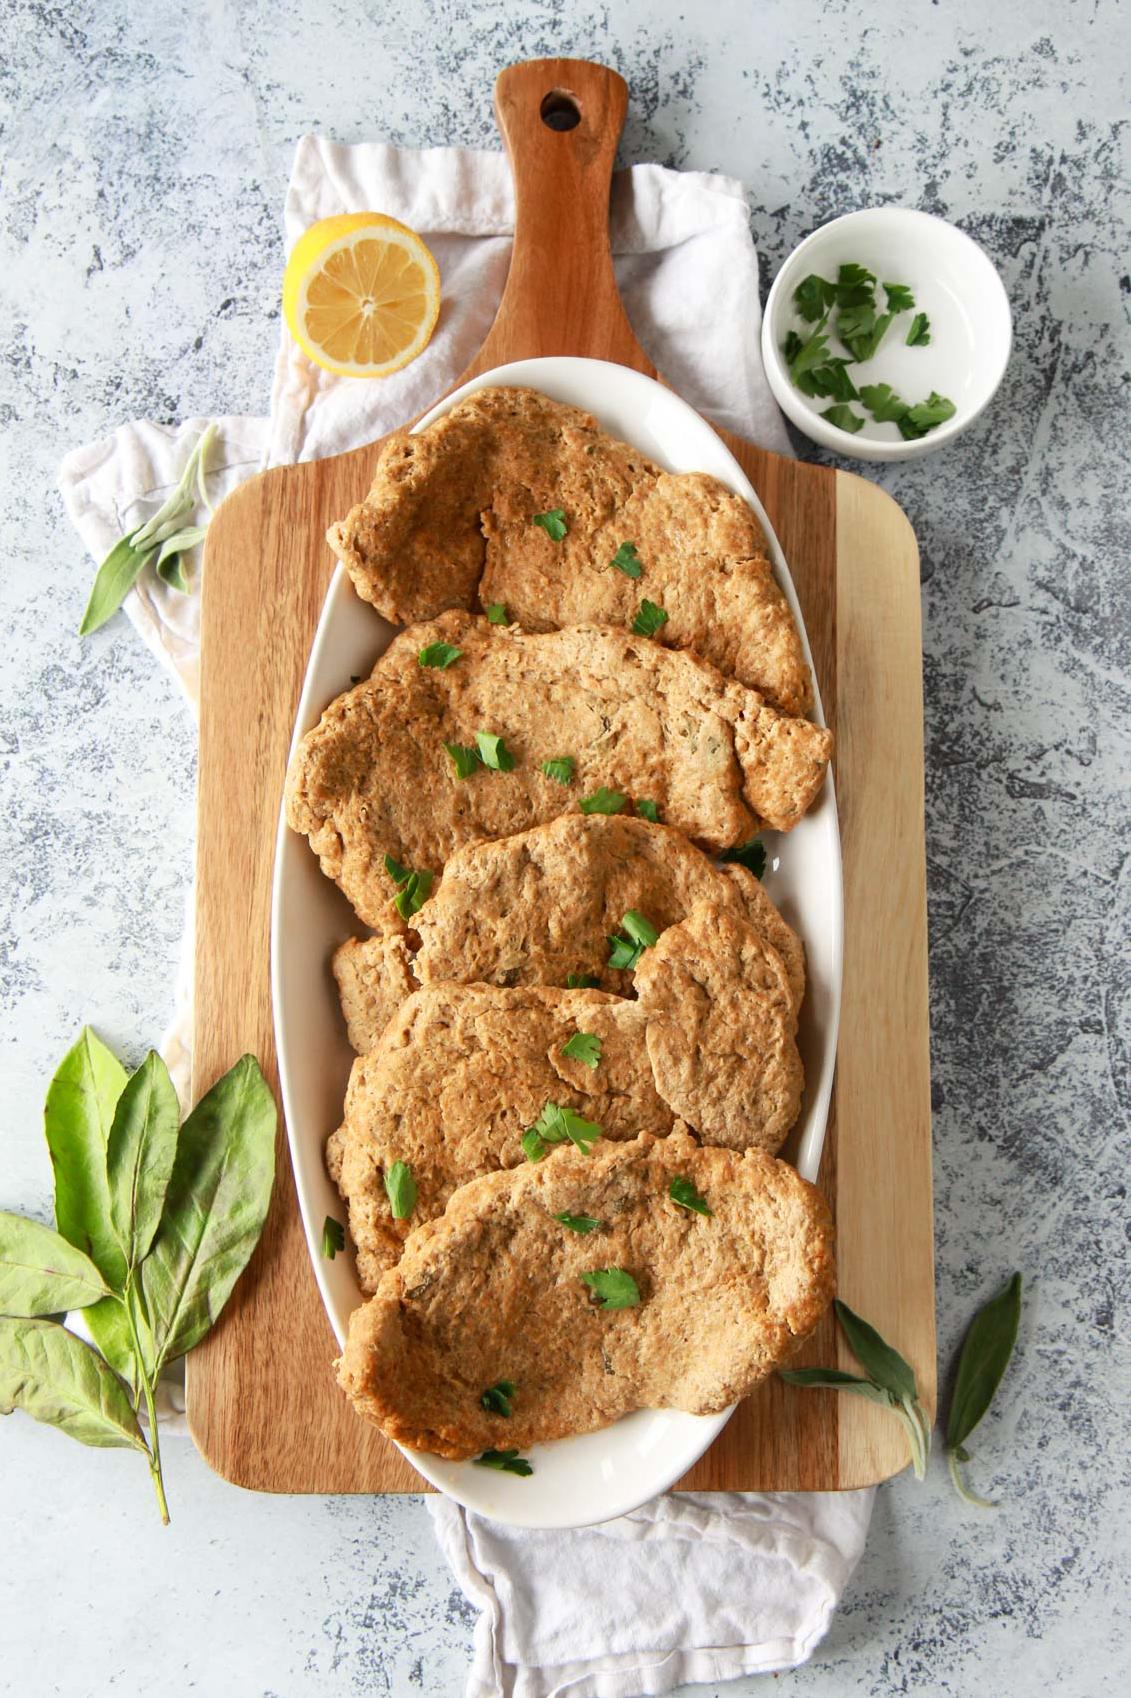  Every bite of this Chickpea Chicken Cutlet is crunchy on the outside and tender on the inside.